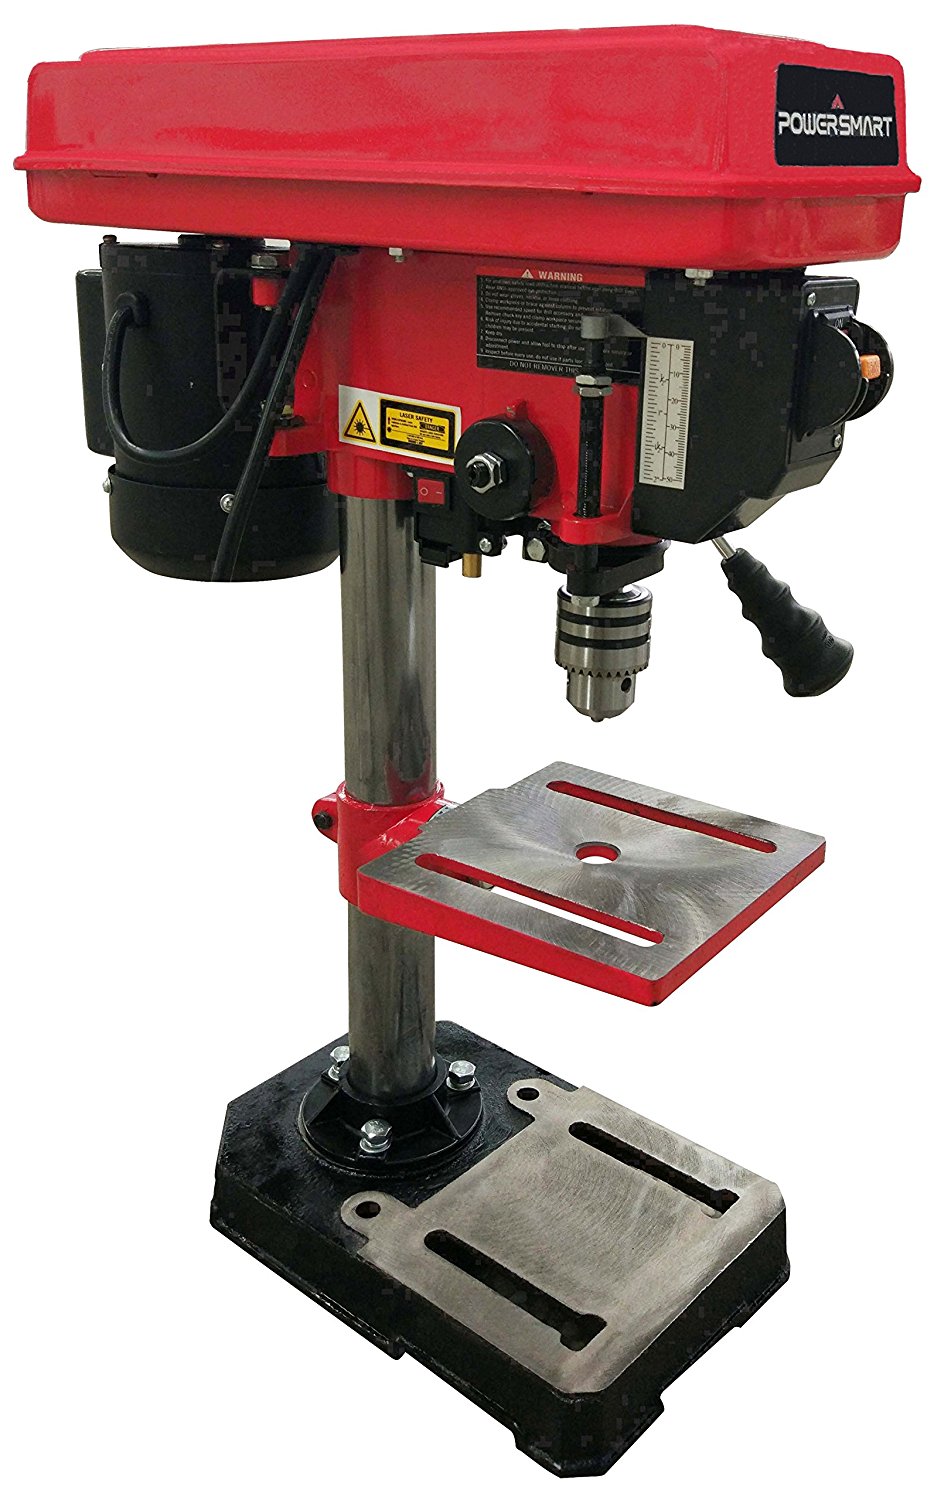 PowerSmart PS308 5-Speed Drill Press with Laser Guide, 8